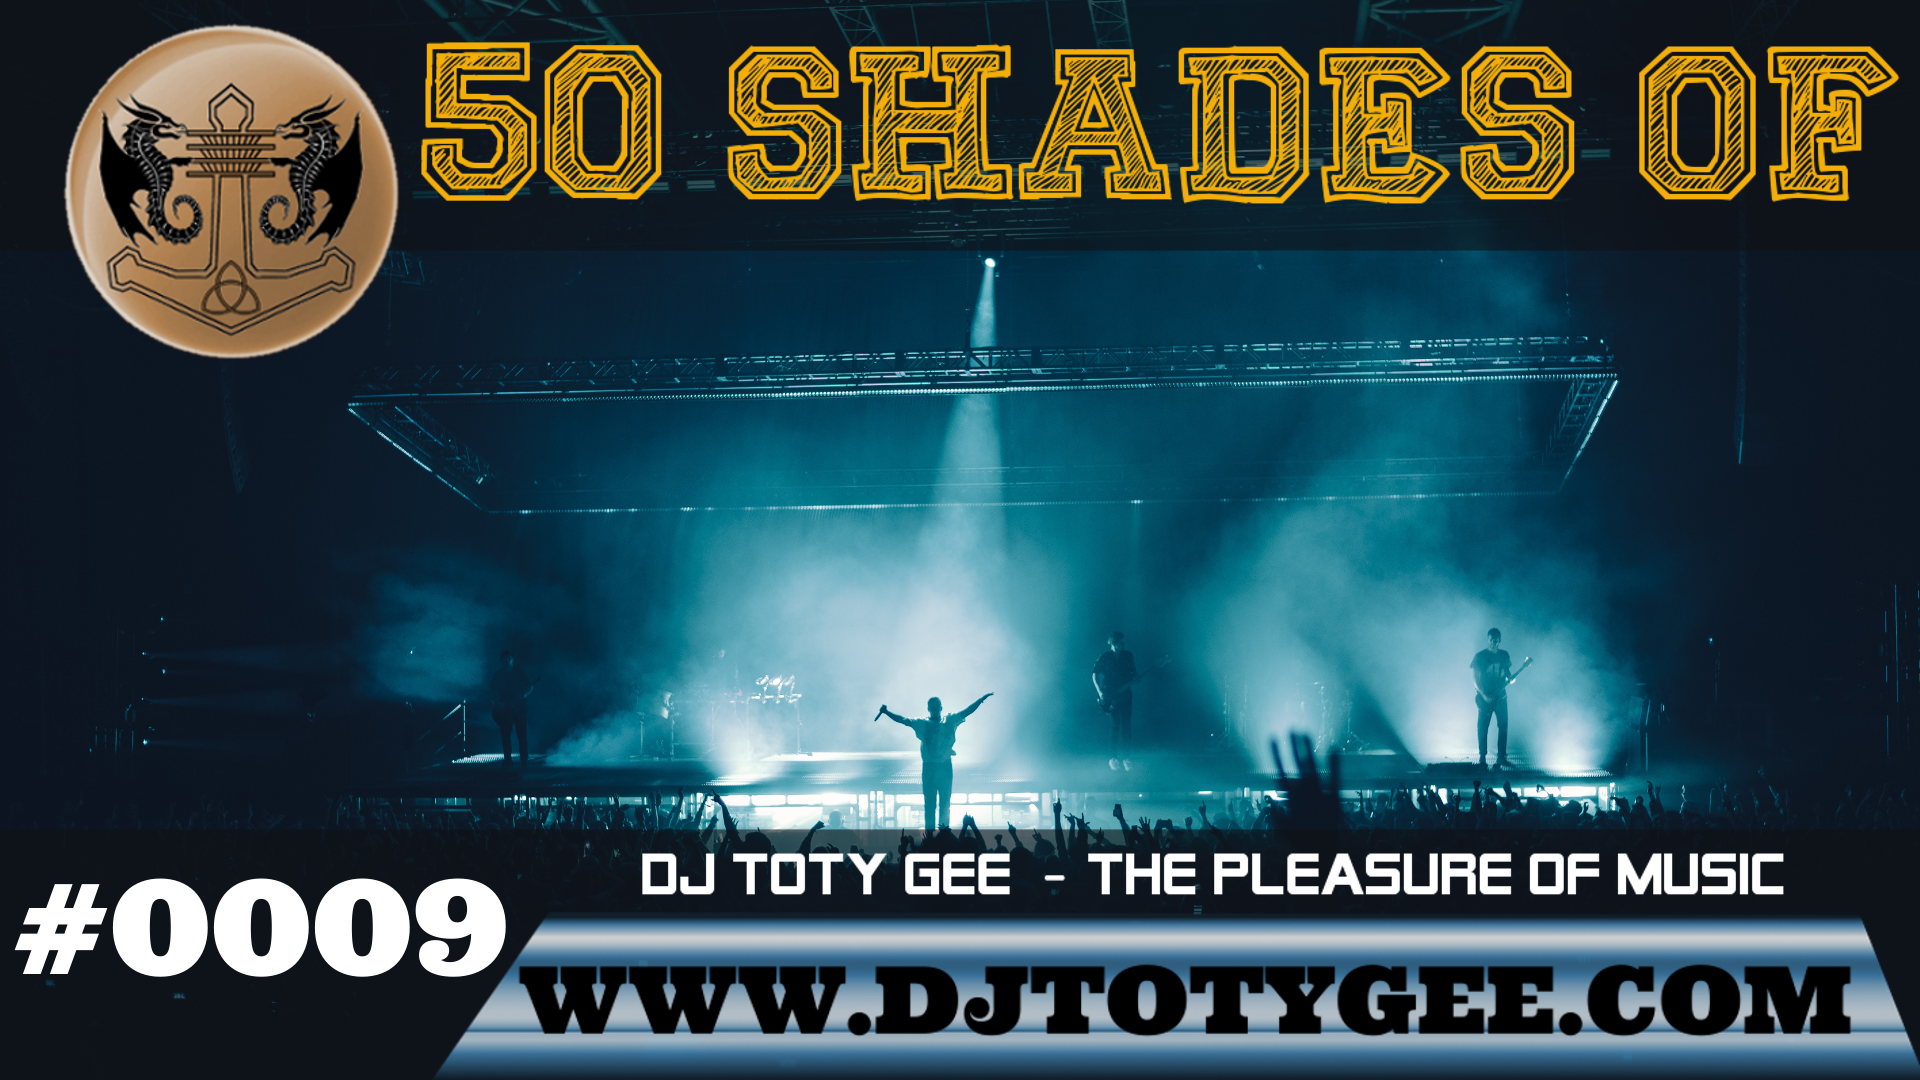 50 Shades of DJ TOTY GEE #0009